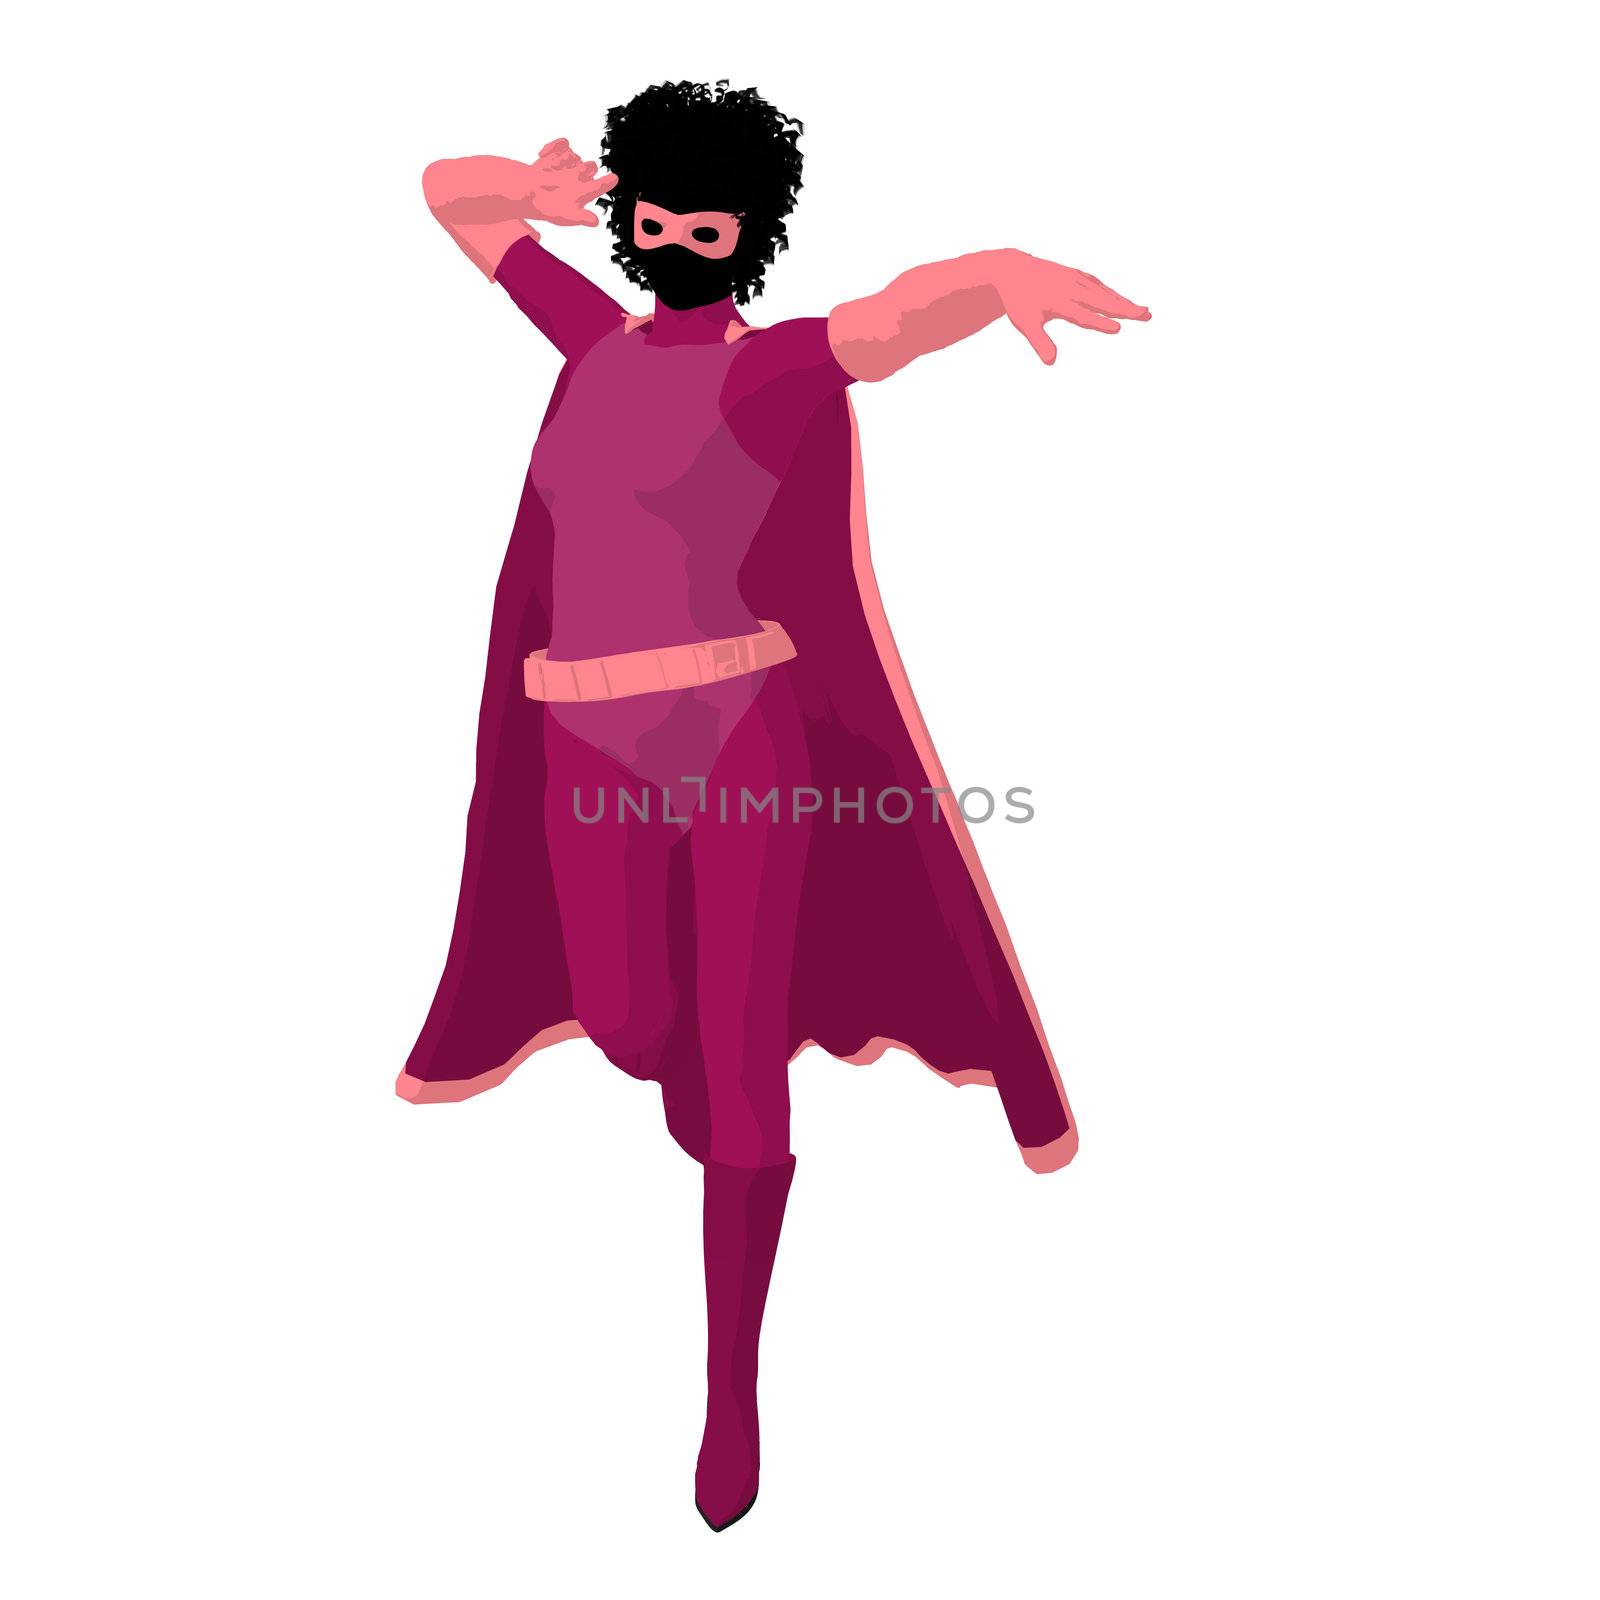 African American Super Heroine Illustration Silhouette by kathygold